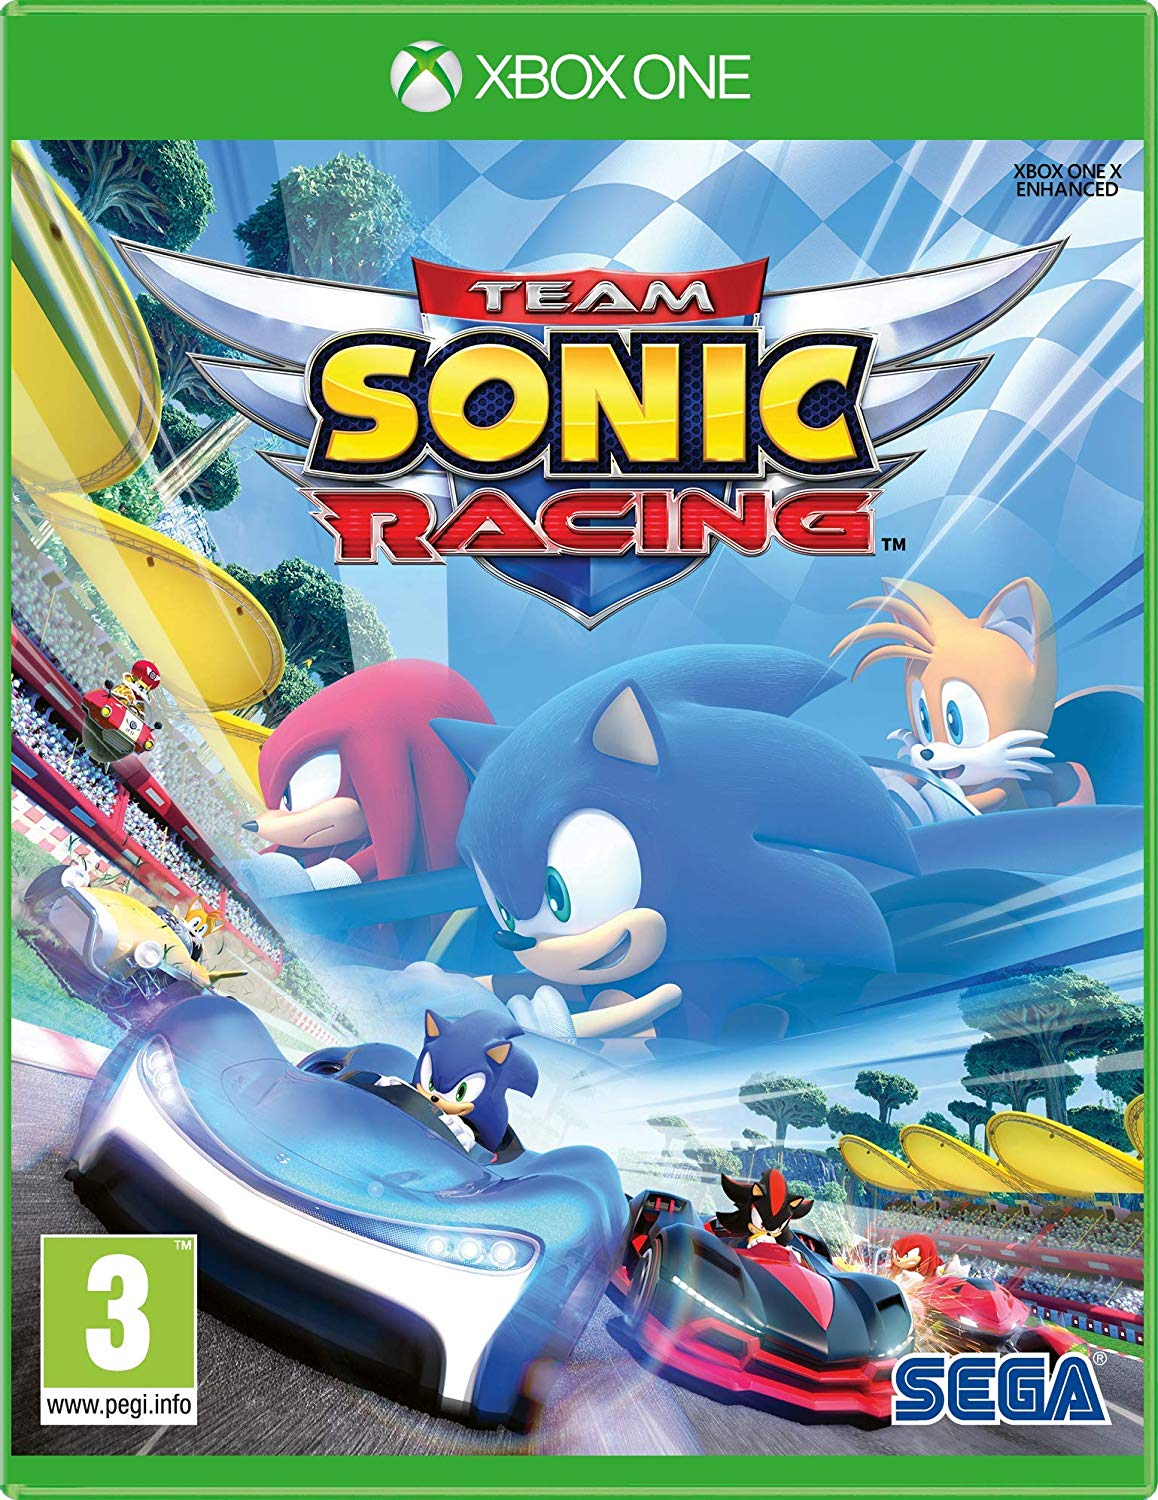 107Â° - Team Sonic Racing (Xbox One) Â£15.99 (+Â£4.49 NP) delivered @ Amazon